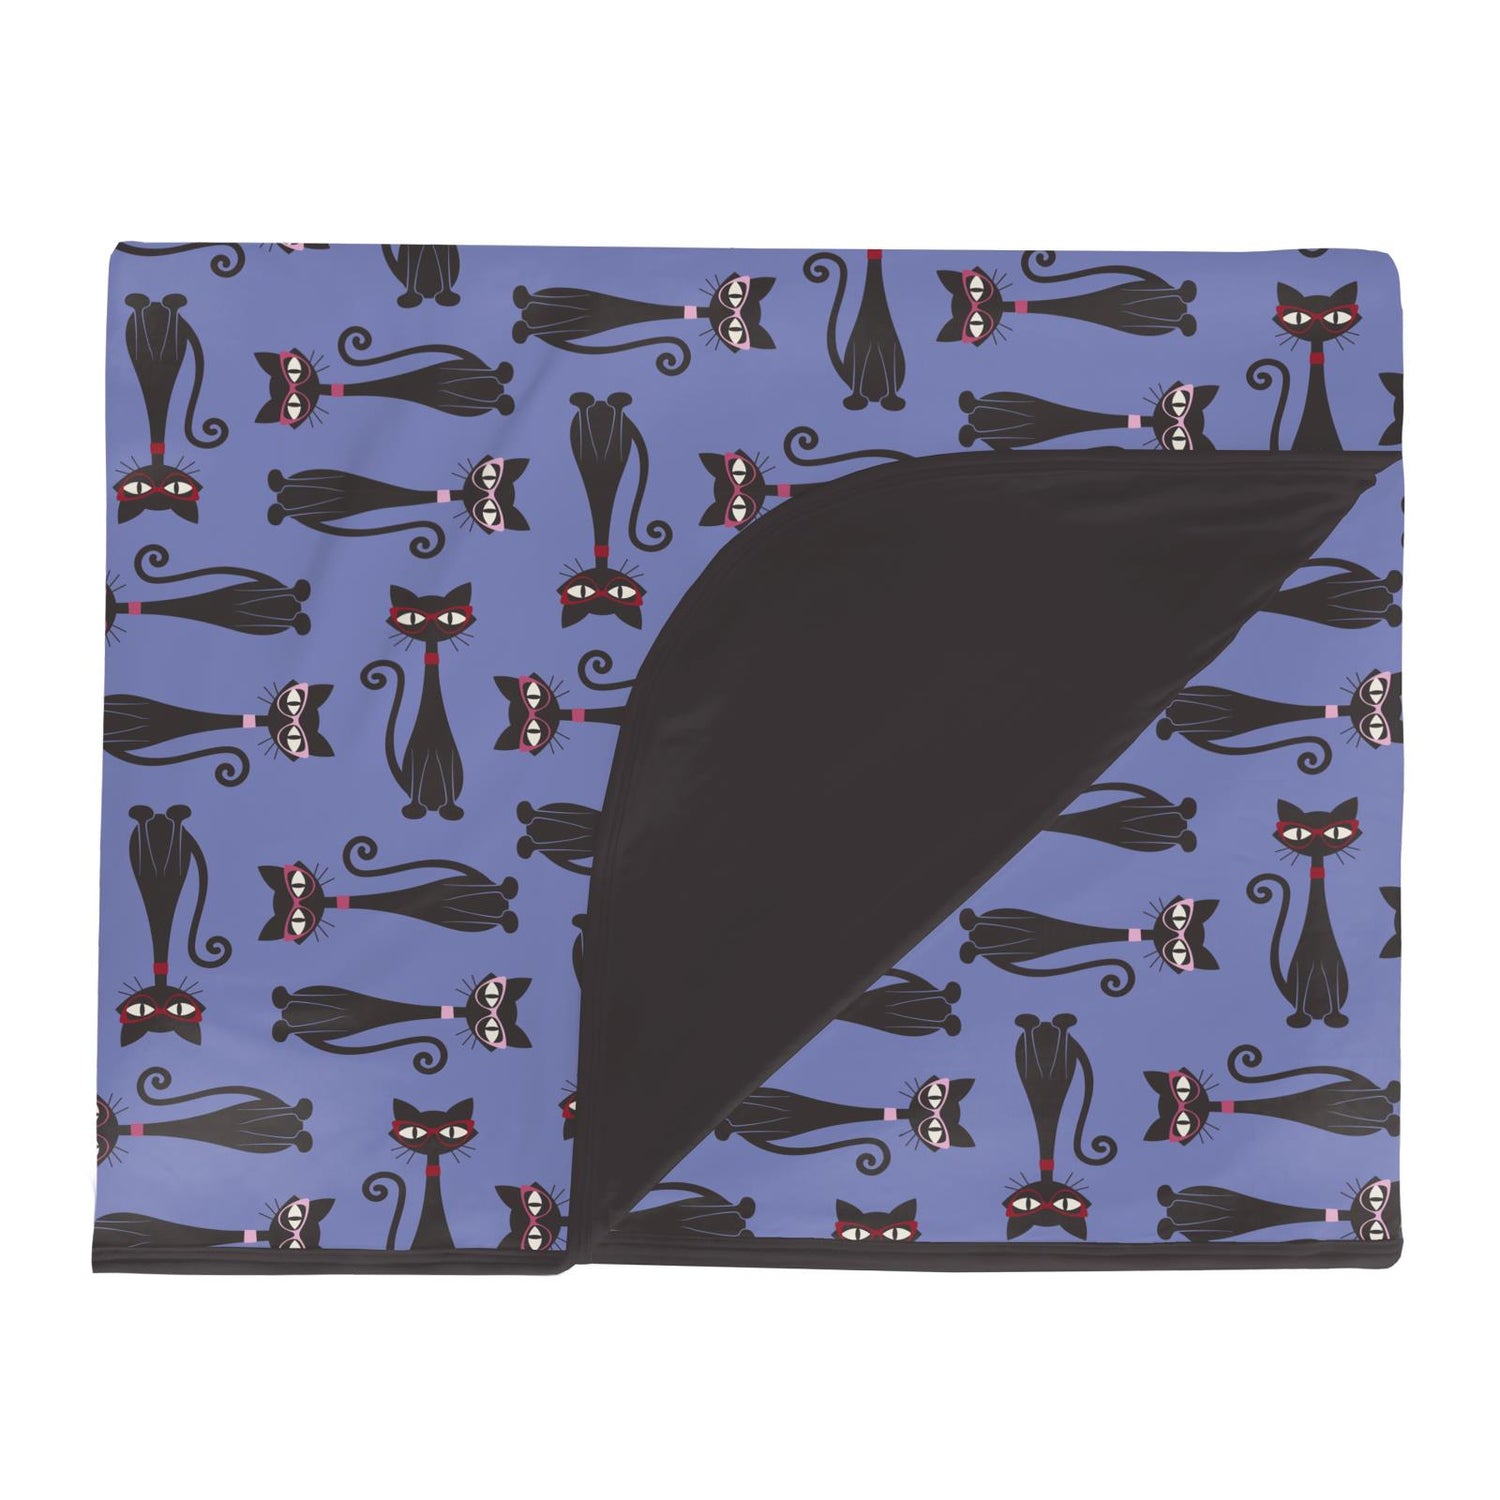 Print Double Layer Throw Blanket in Forget Me Not Cool Cats